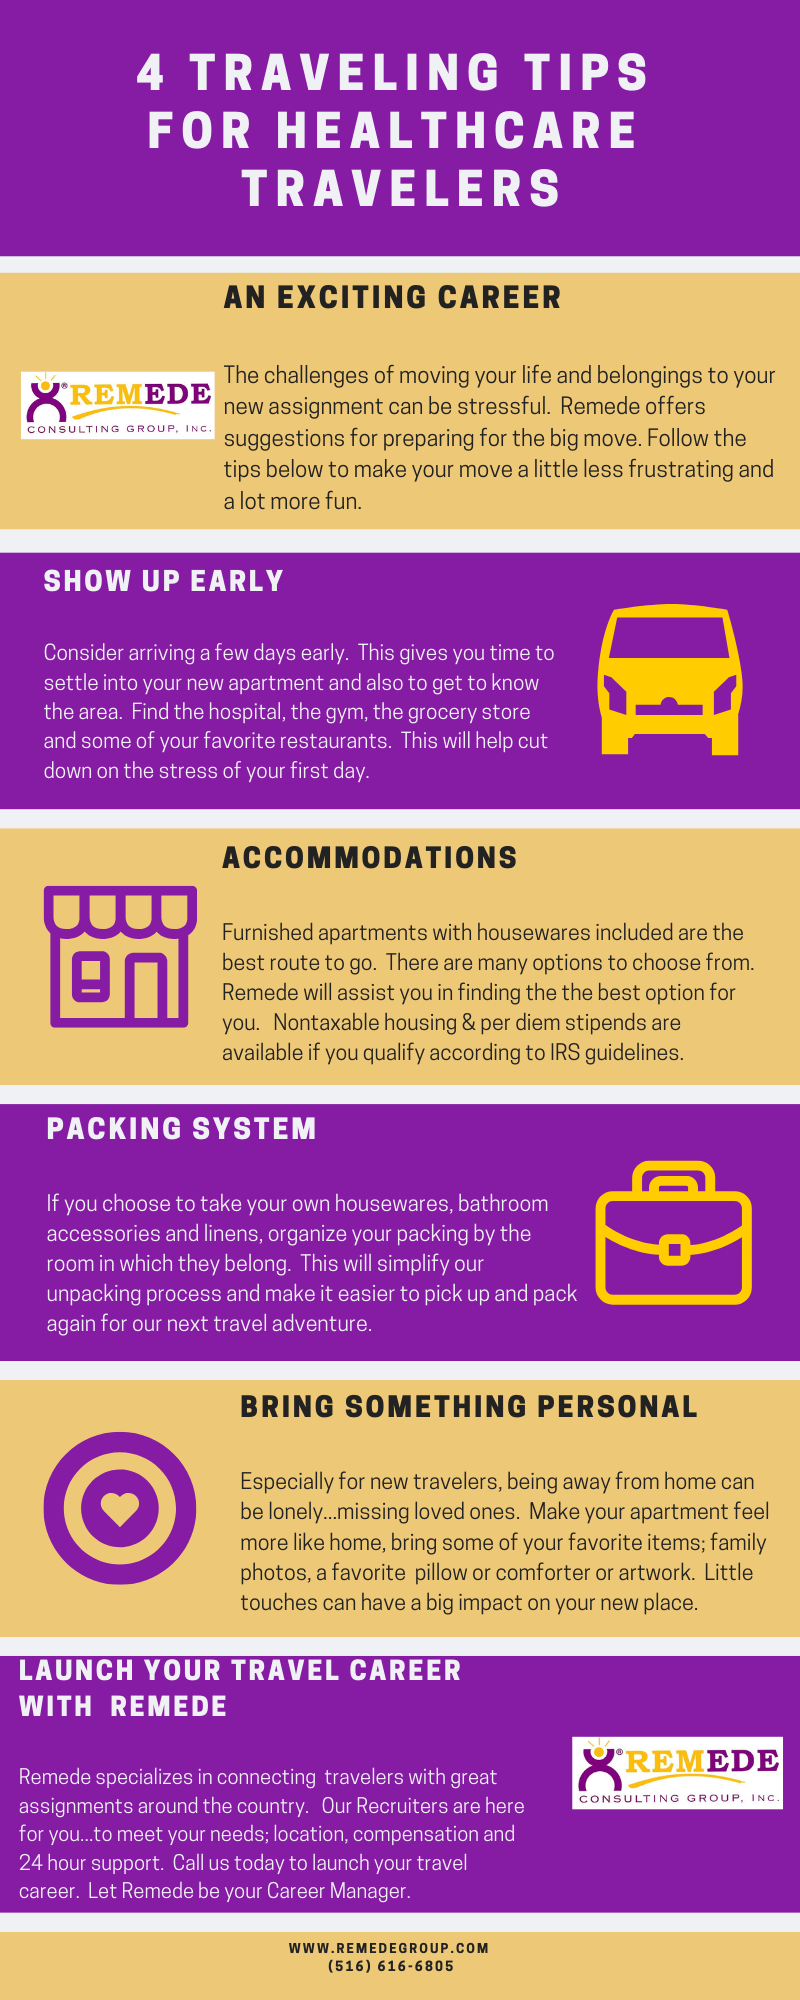 Traveling Tips for Healthcare Travelers Infographic